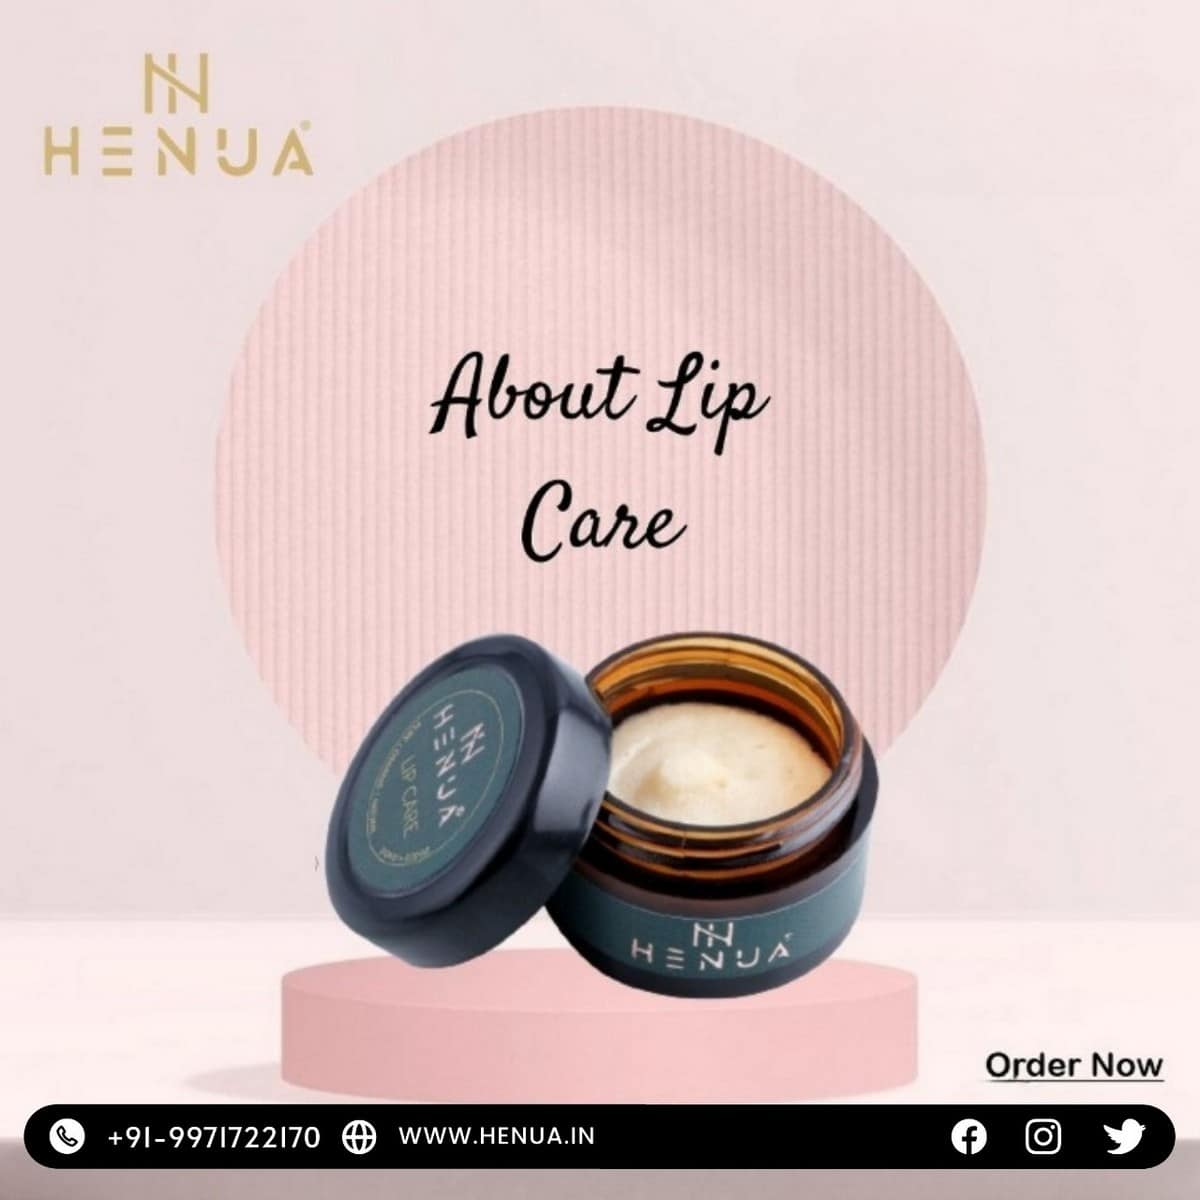 Time to Take Care of Your Lips in Chilly Winter